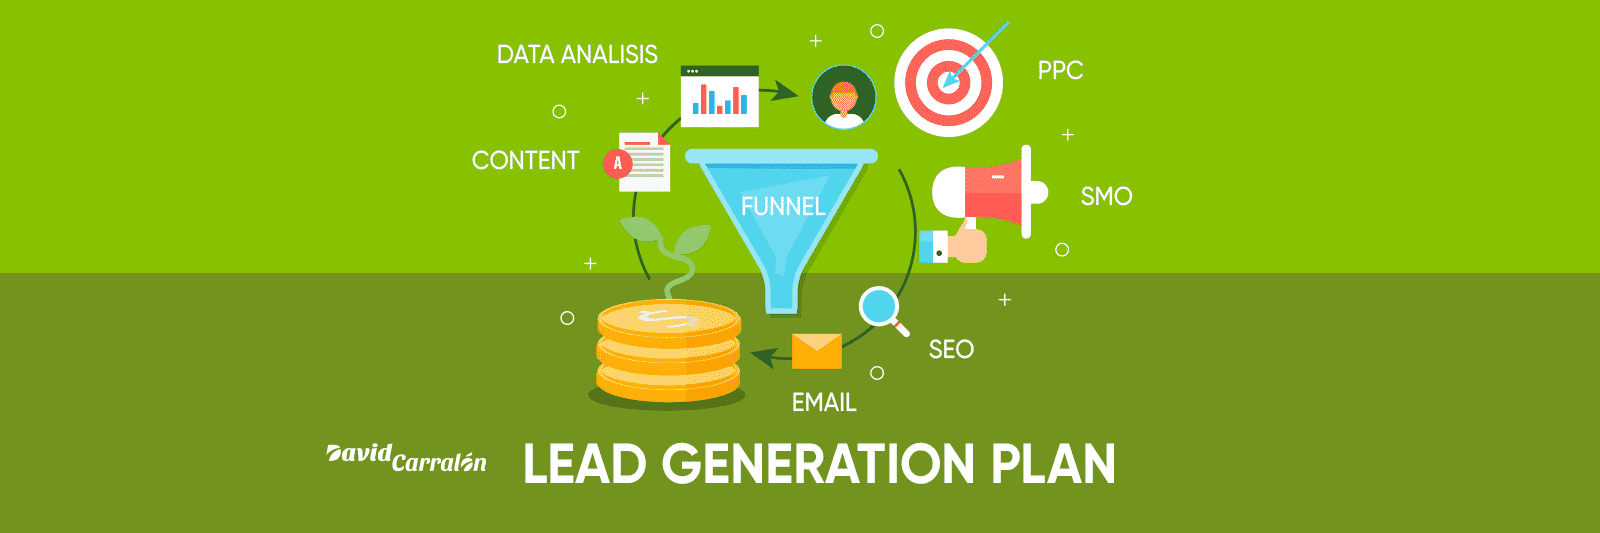 Lead generation funnel attracting traffic from various channels